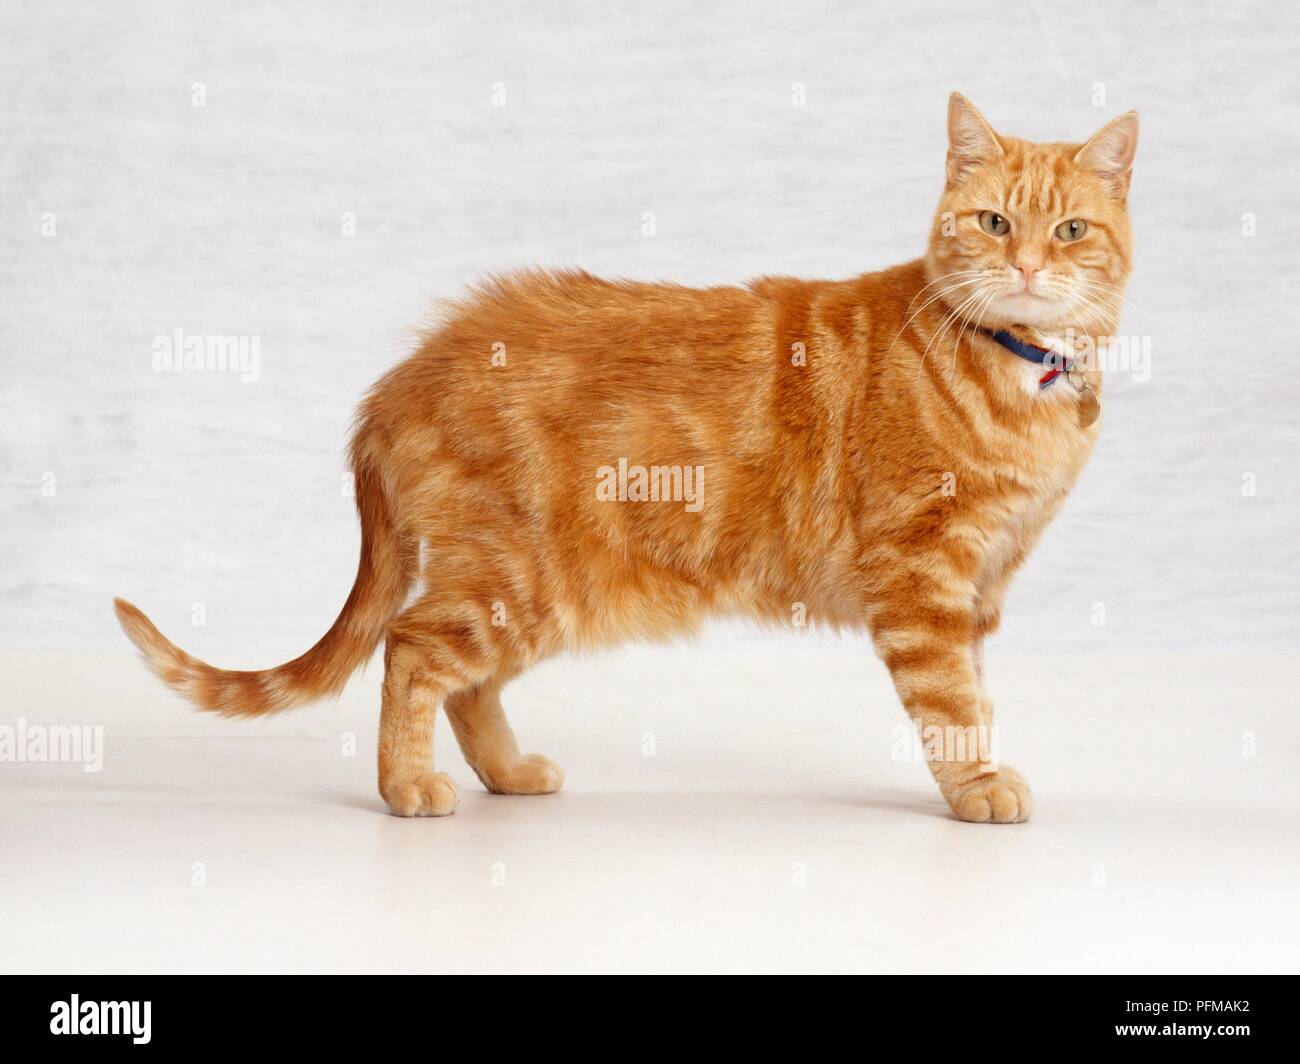 Ginger tabby cat, debout, looking at camera Banque D'Images